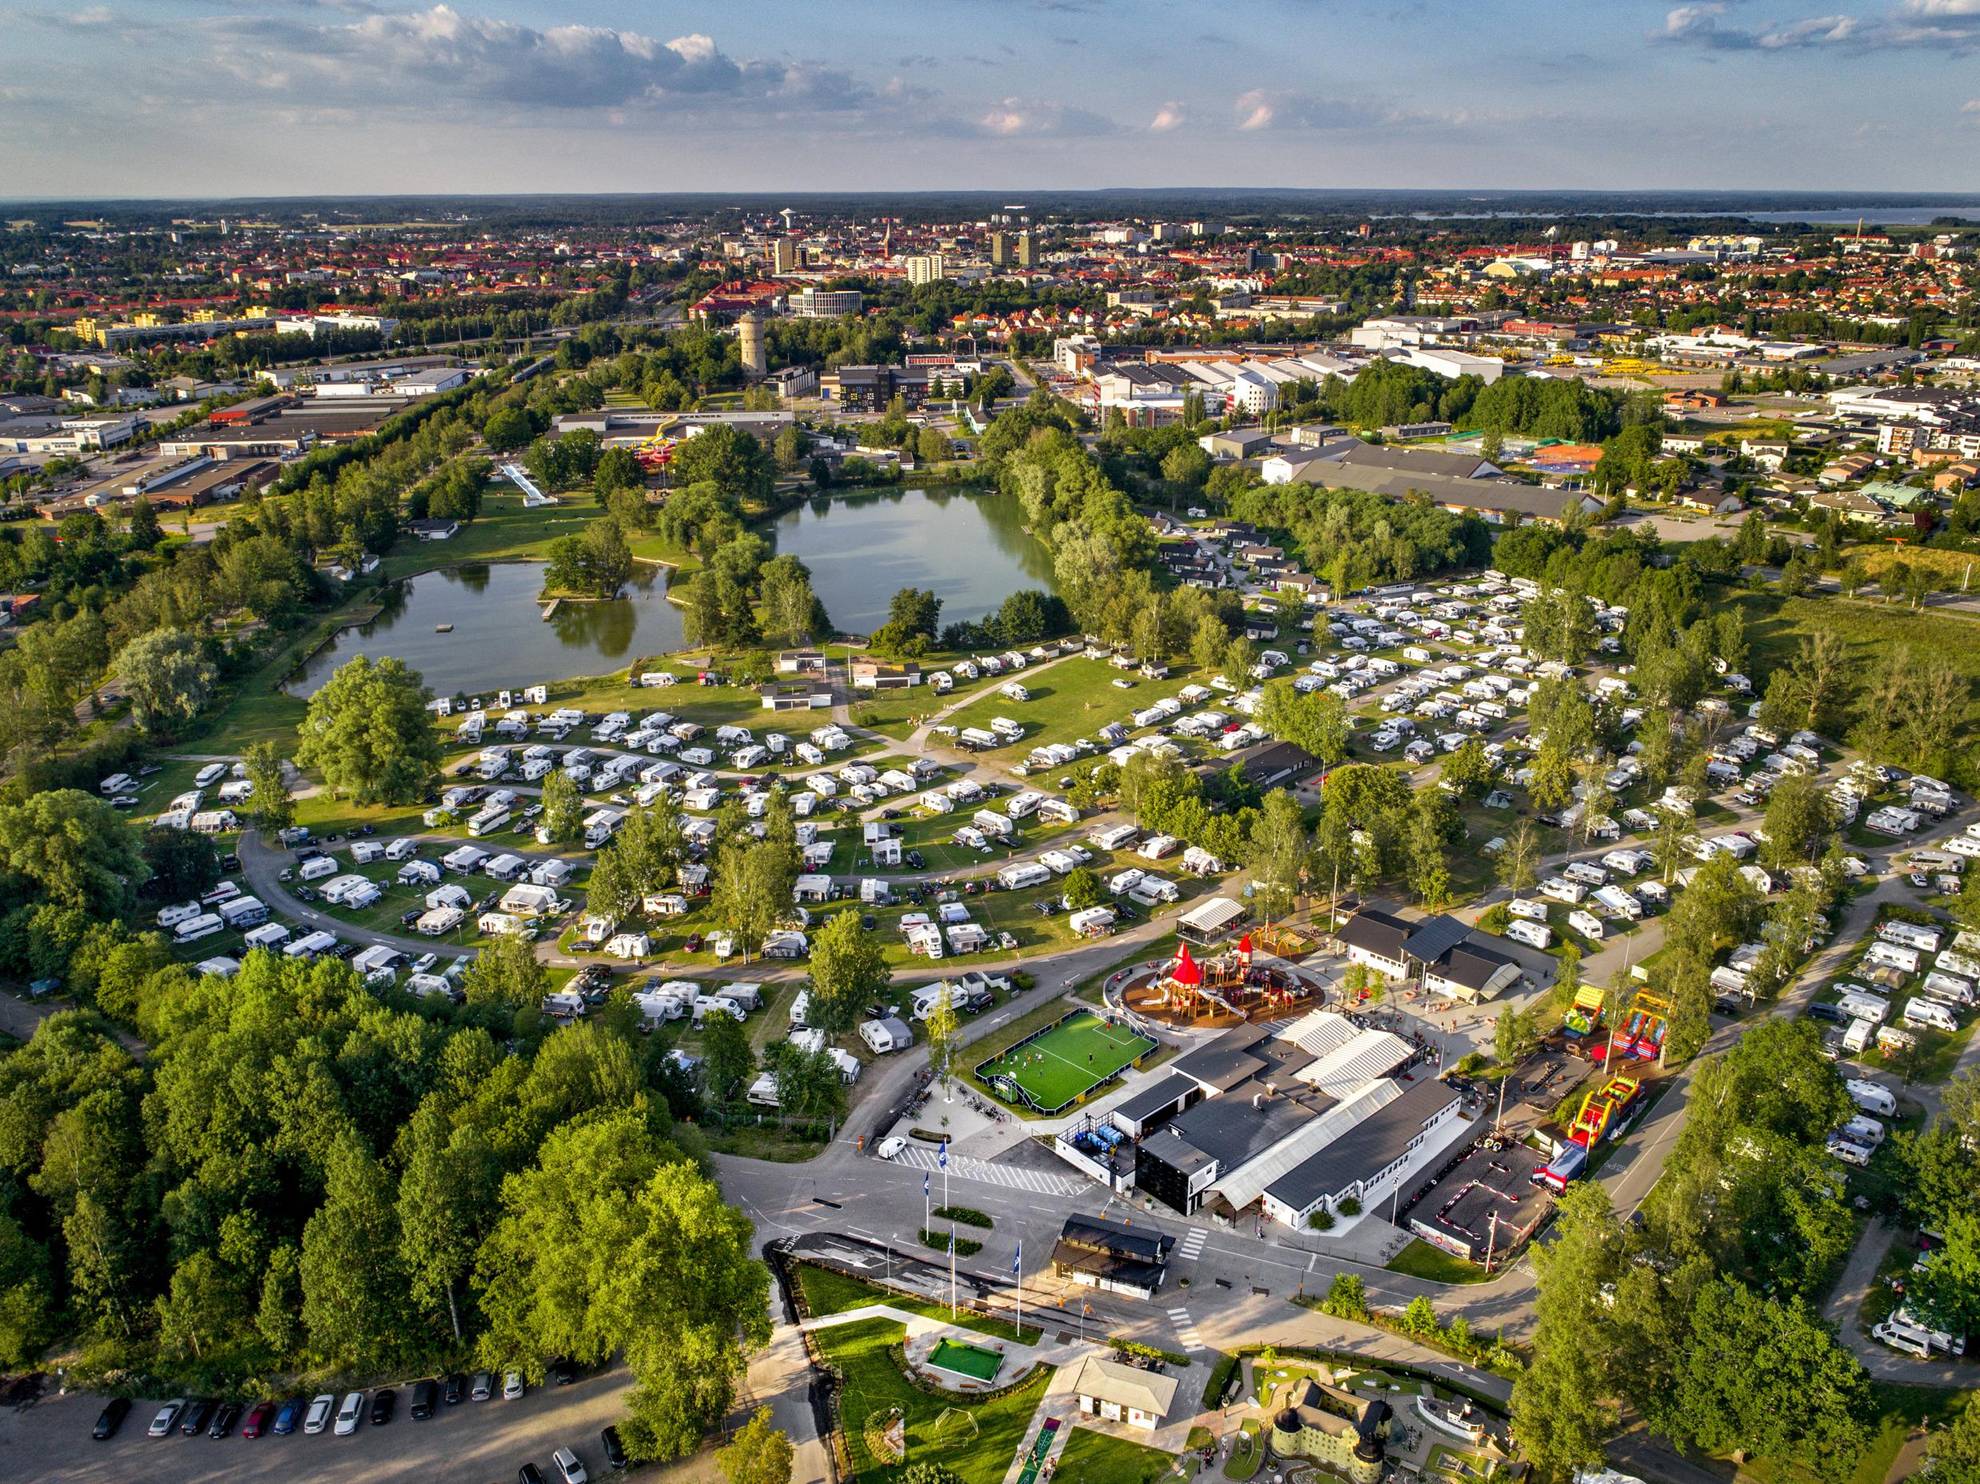 An aerial view of Gustavsvik camping during the summer.